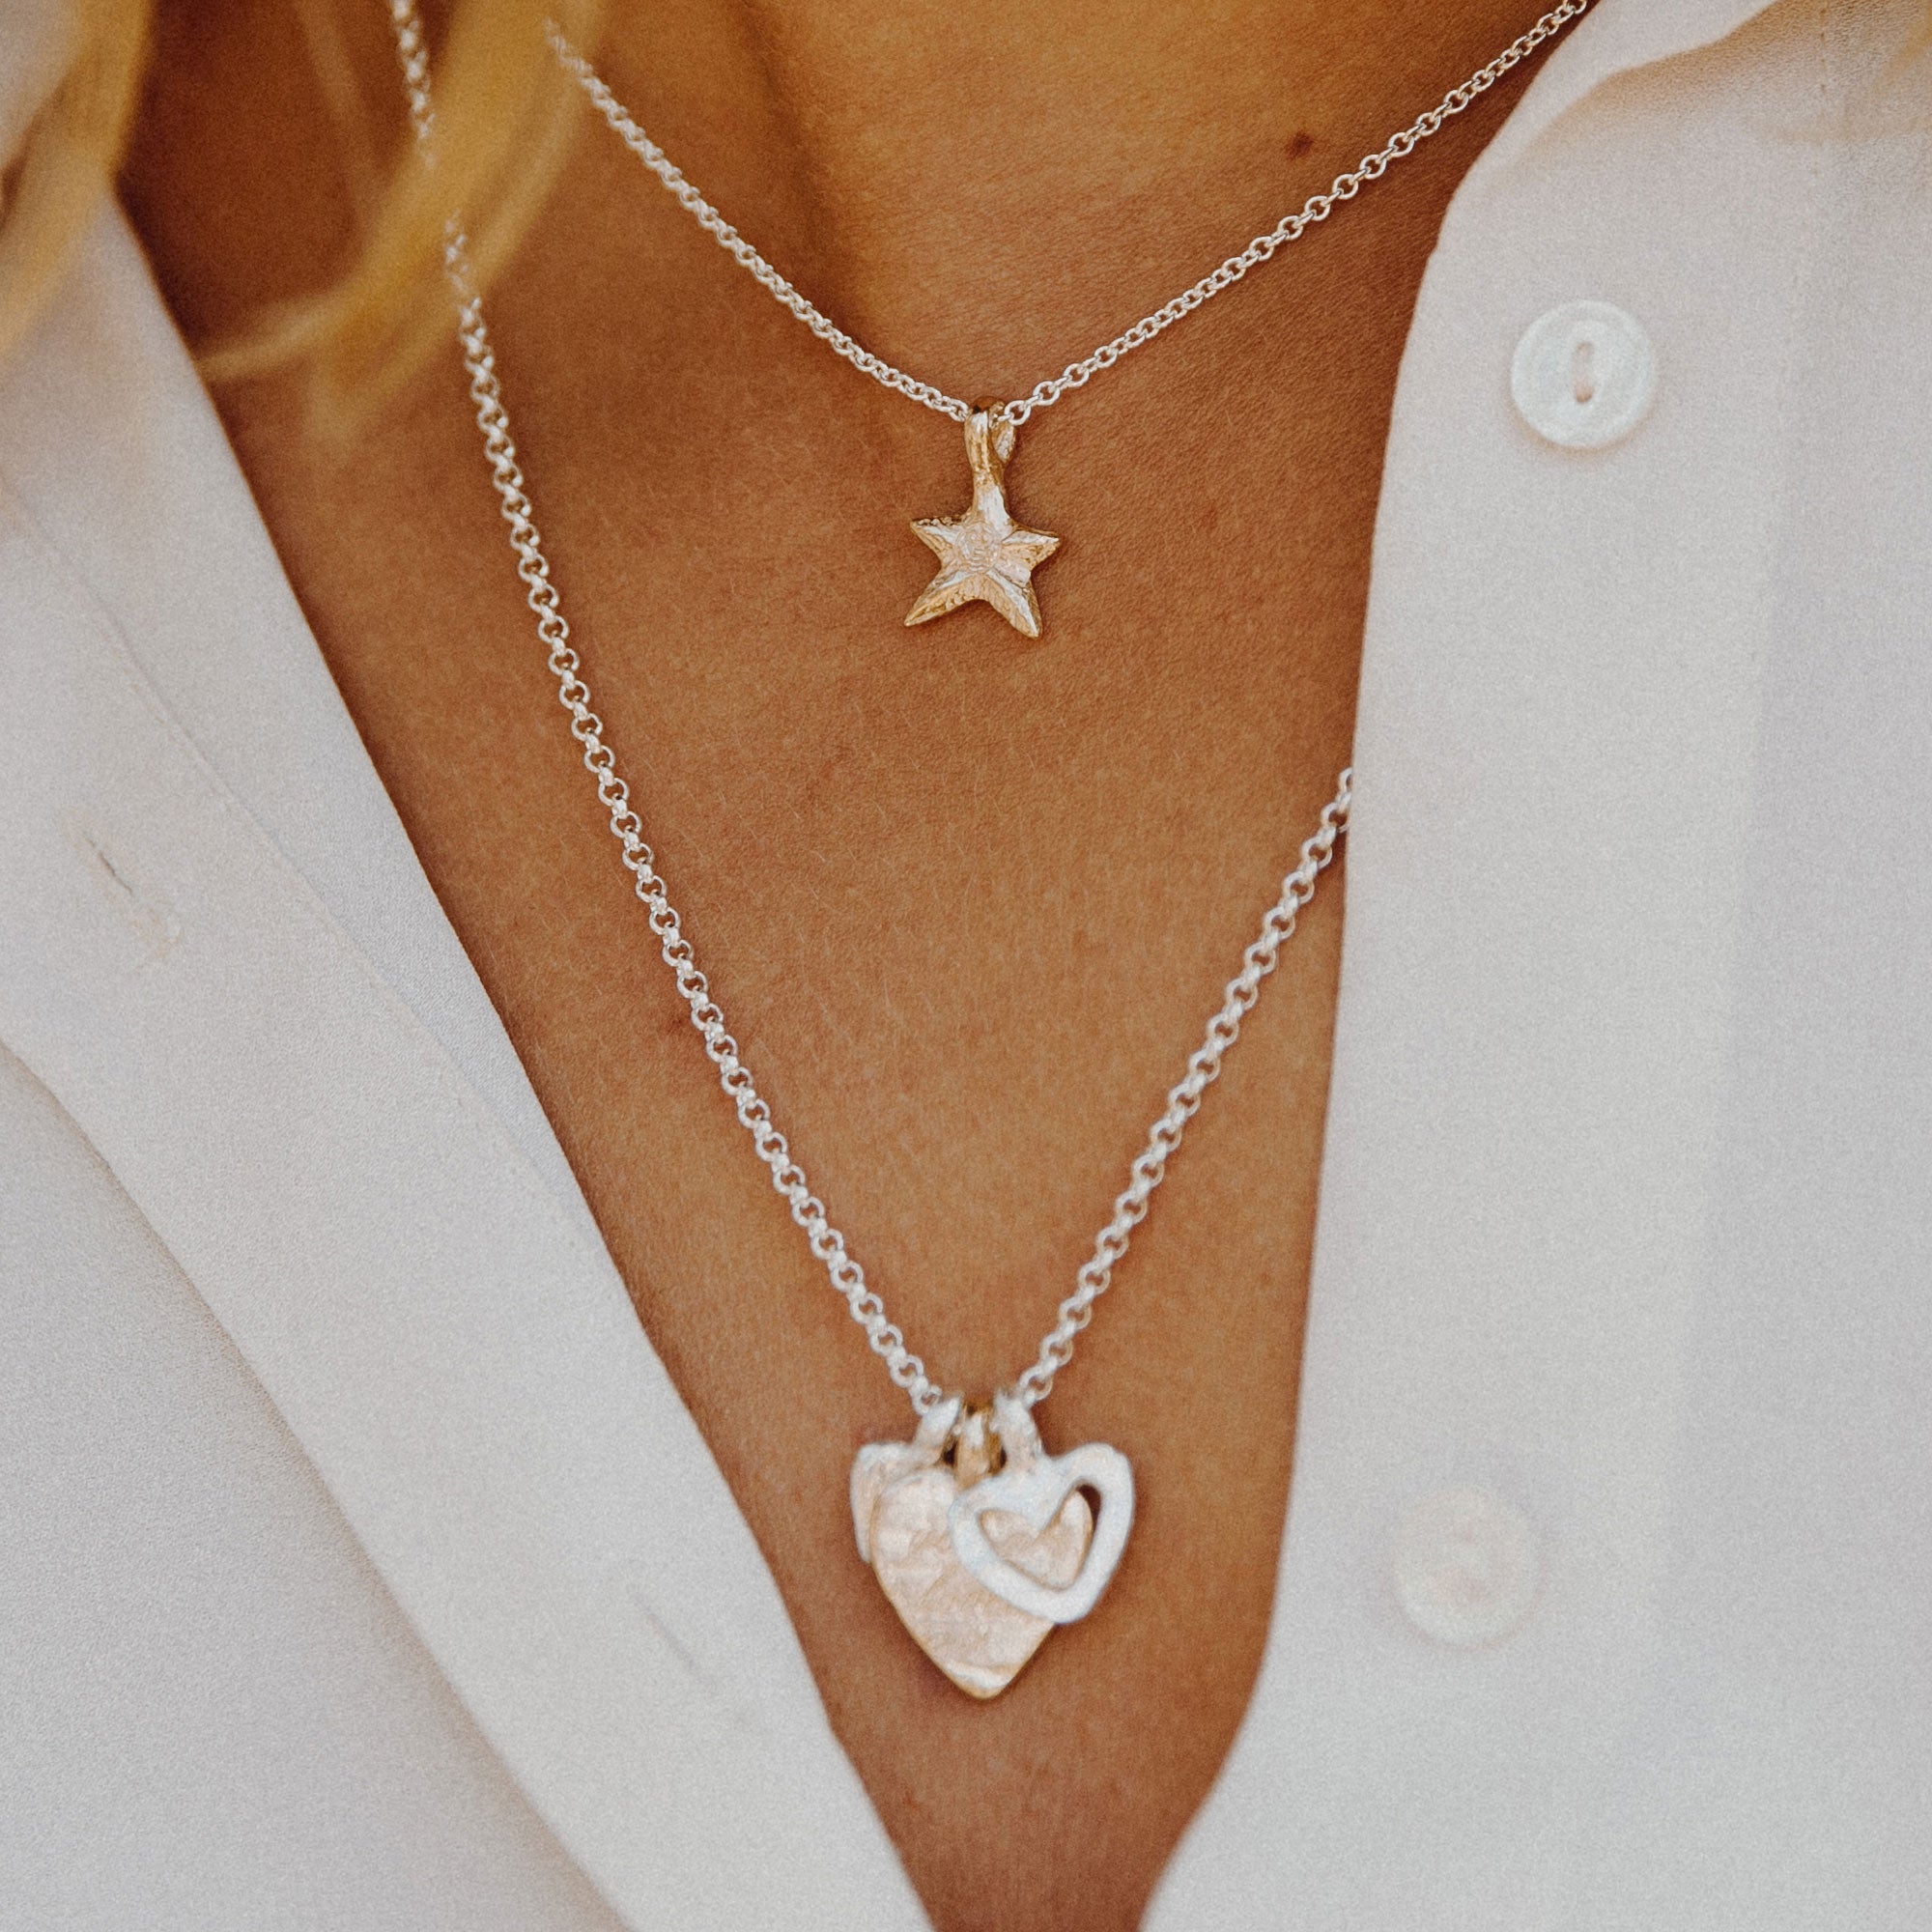 Silver & Gold A Lot of Love Necklace